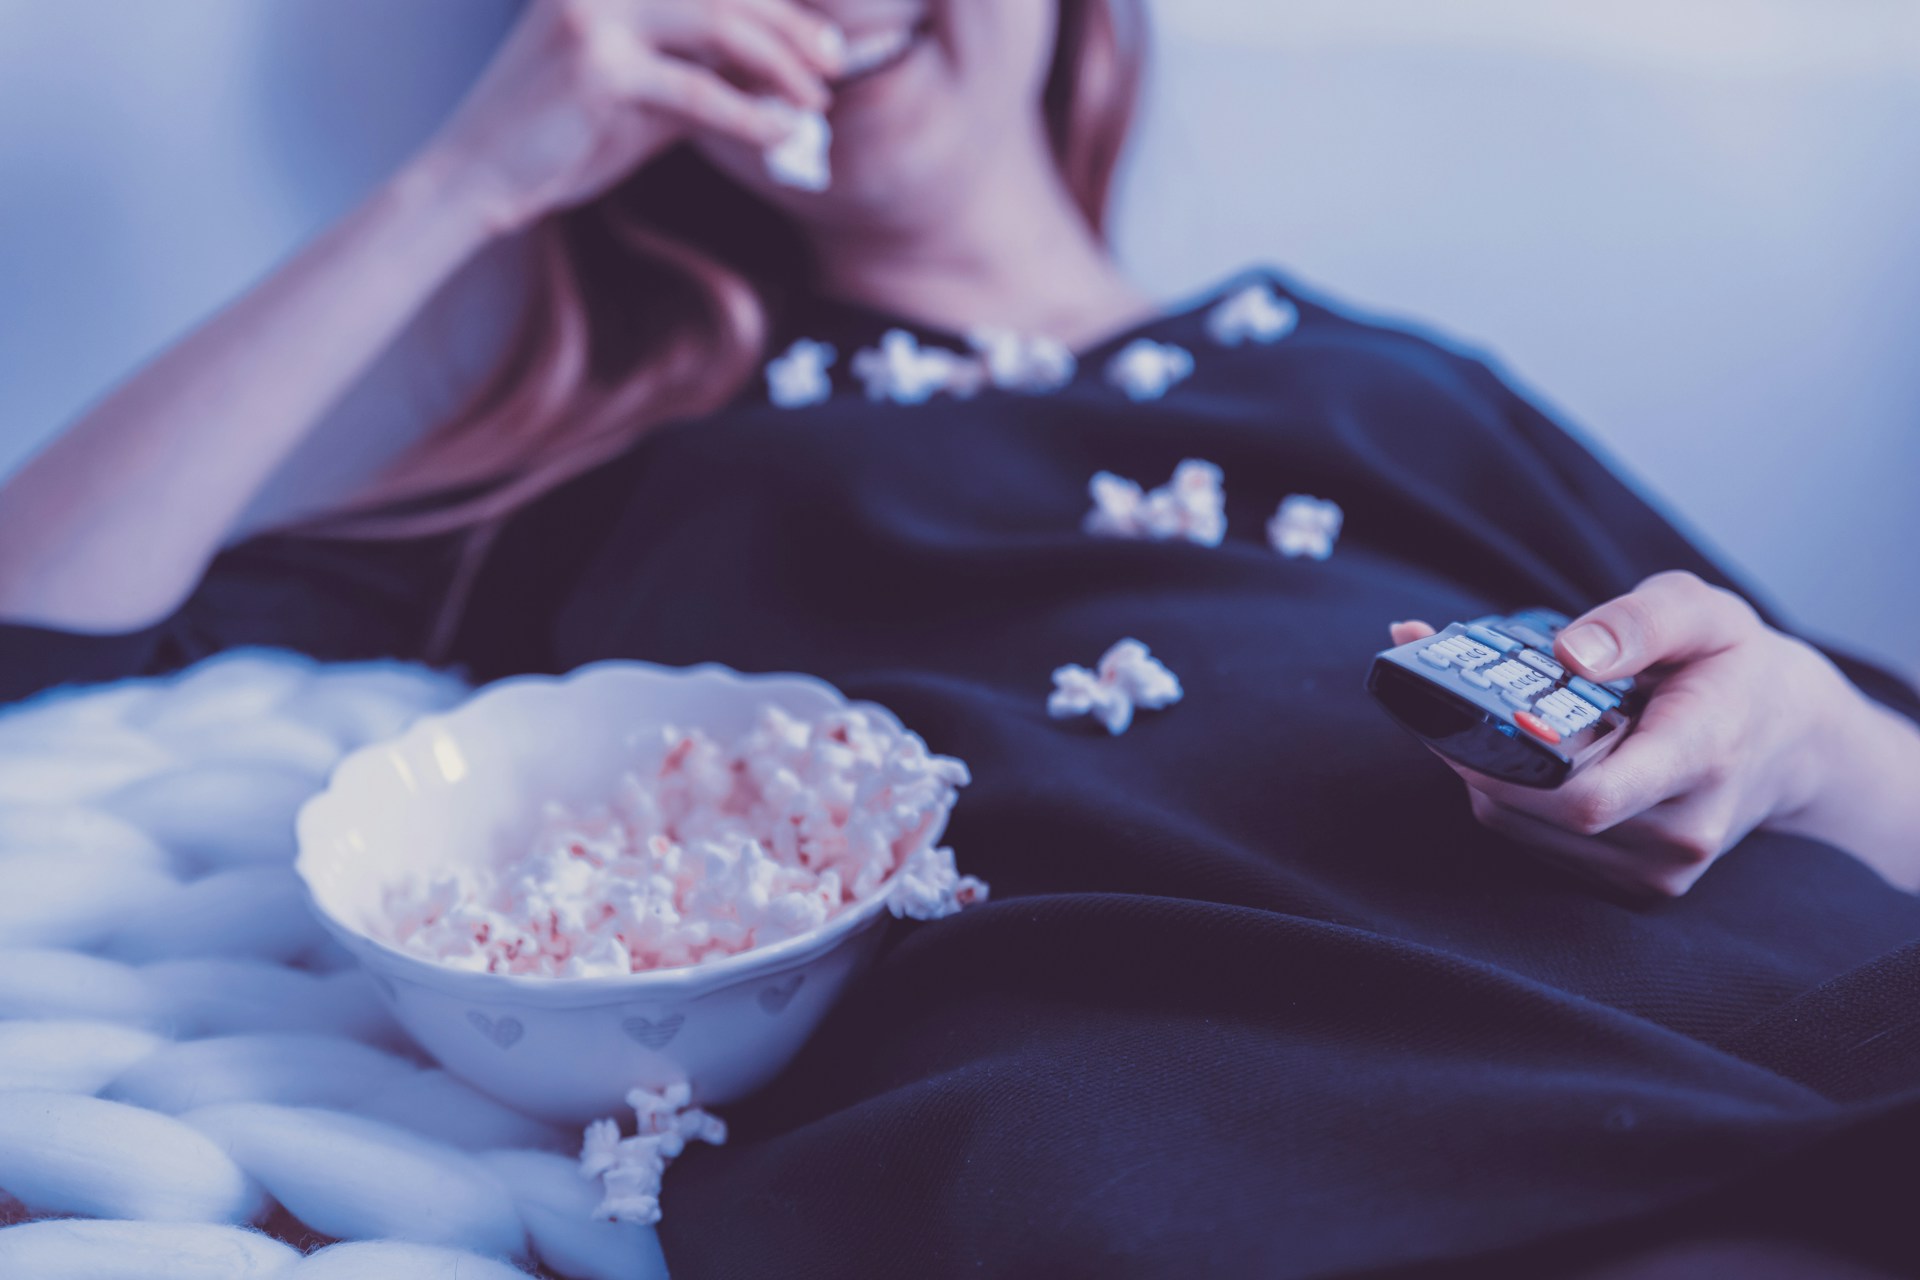 Women eating popcorn on a bed after taking a cannabis edible